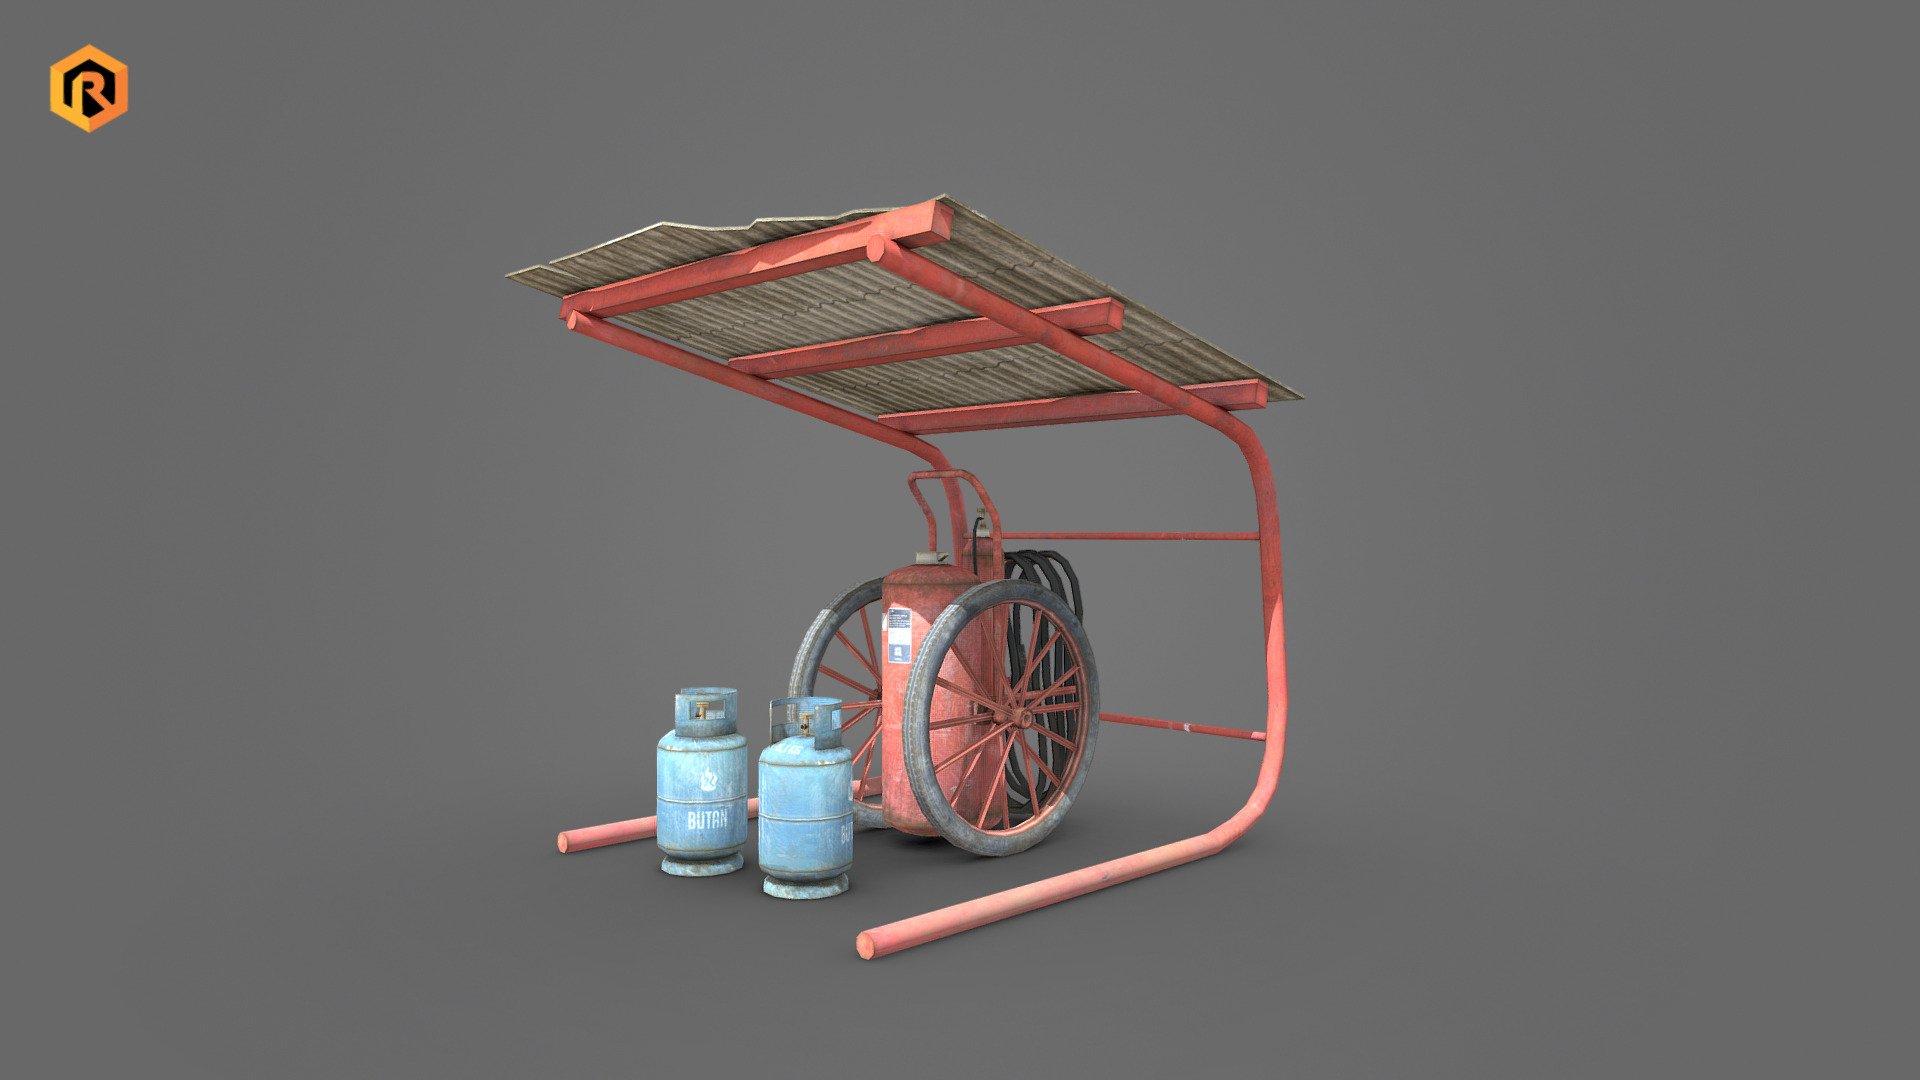 High-quality low-poly 3D model of retro Fire Extinguisher on wheels.

There is also a shelter part and some butane bottles there.

It is best for use in games and other VR / AR, real-time applications such as Unity or Unreal Engine.  

It can also be rendered in Blender (ex Cycles) or Vray as the model is equipped with detailed textures.

Model is built with great attention to details and realistic proportions with correct geometry.  

Technical details:

- 4096 x 4096 Diffuse and AO textures for main part

- 2048 x 2048 Diffuse and AO textures for butan bottle

- 5328 Triangles

- 2622 Polygons

- 3080 Vertices

- Model is correctly divided into main part, wheels, bottles, shelter etc.

- Model completely unwrapped

- Model is fully textured with all materials applied. 

- Pivot points are correctly placed to suit animation process.

- Model scaled to approximate real world size

- All nodes, materials and textures are appropriately named 3d model